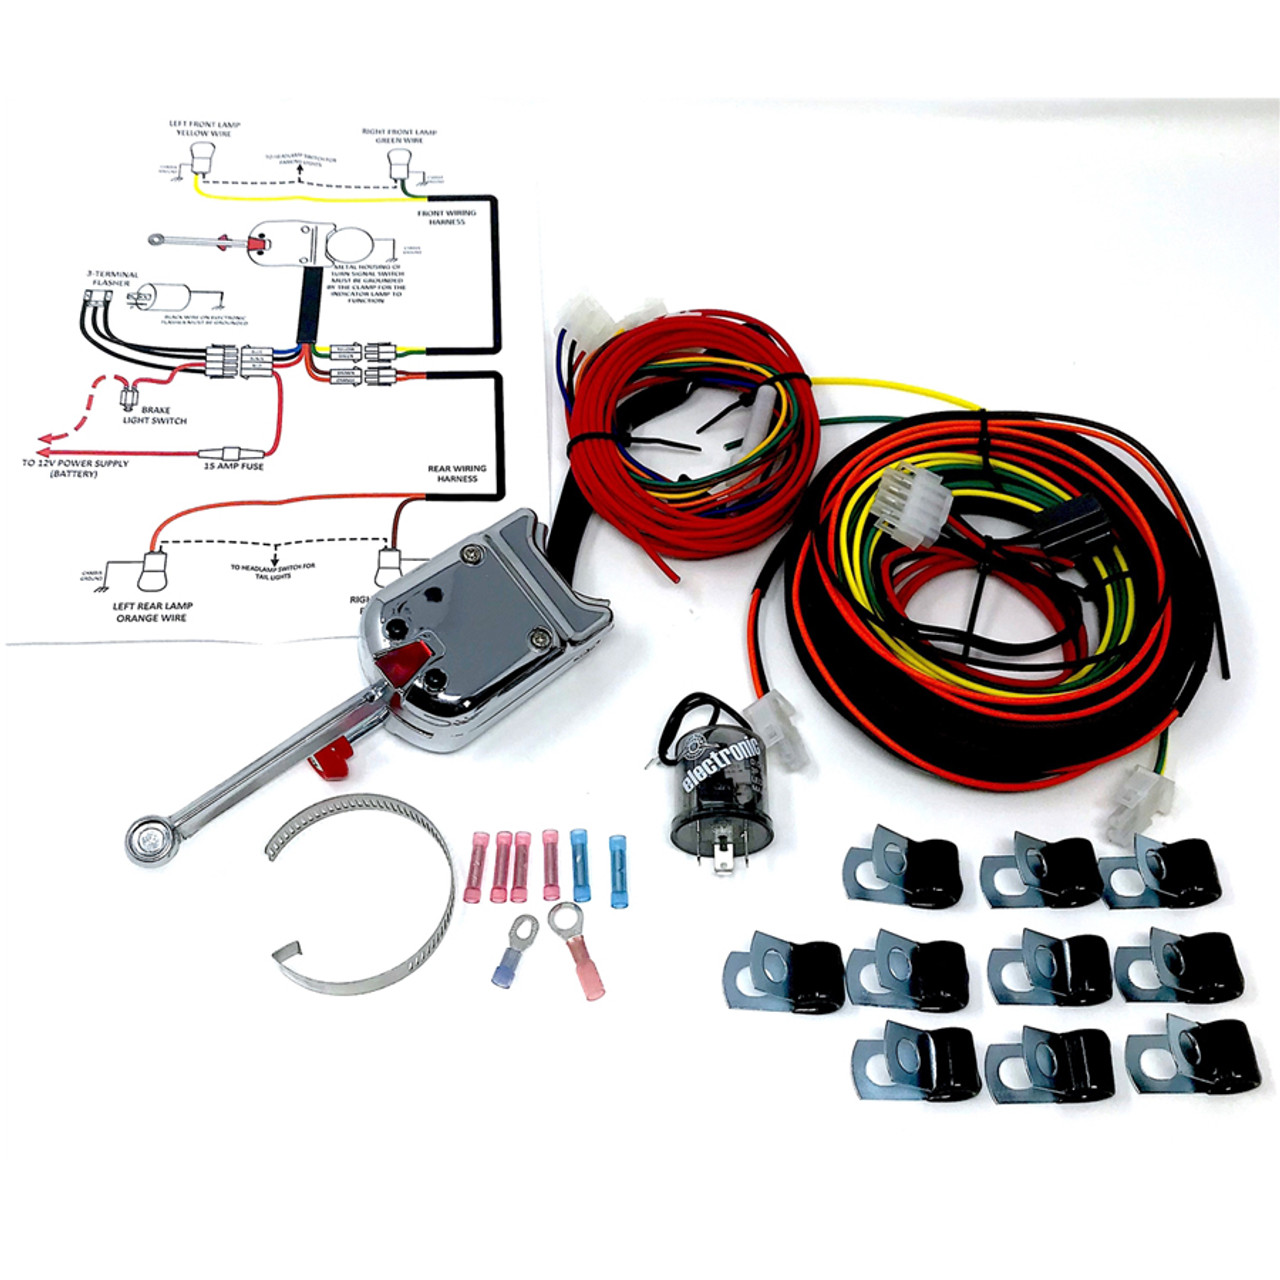 Heavy Duty Turn Signal Complete Wiring Kit for Cars and Trucks 12 volts TS01